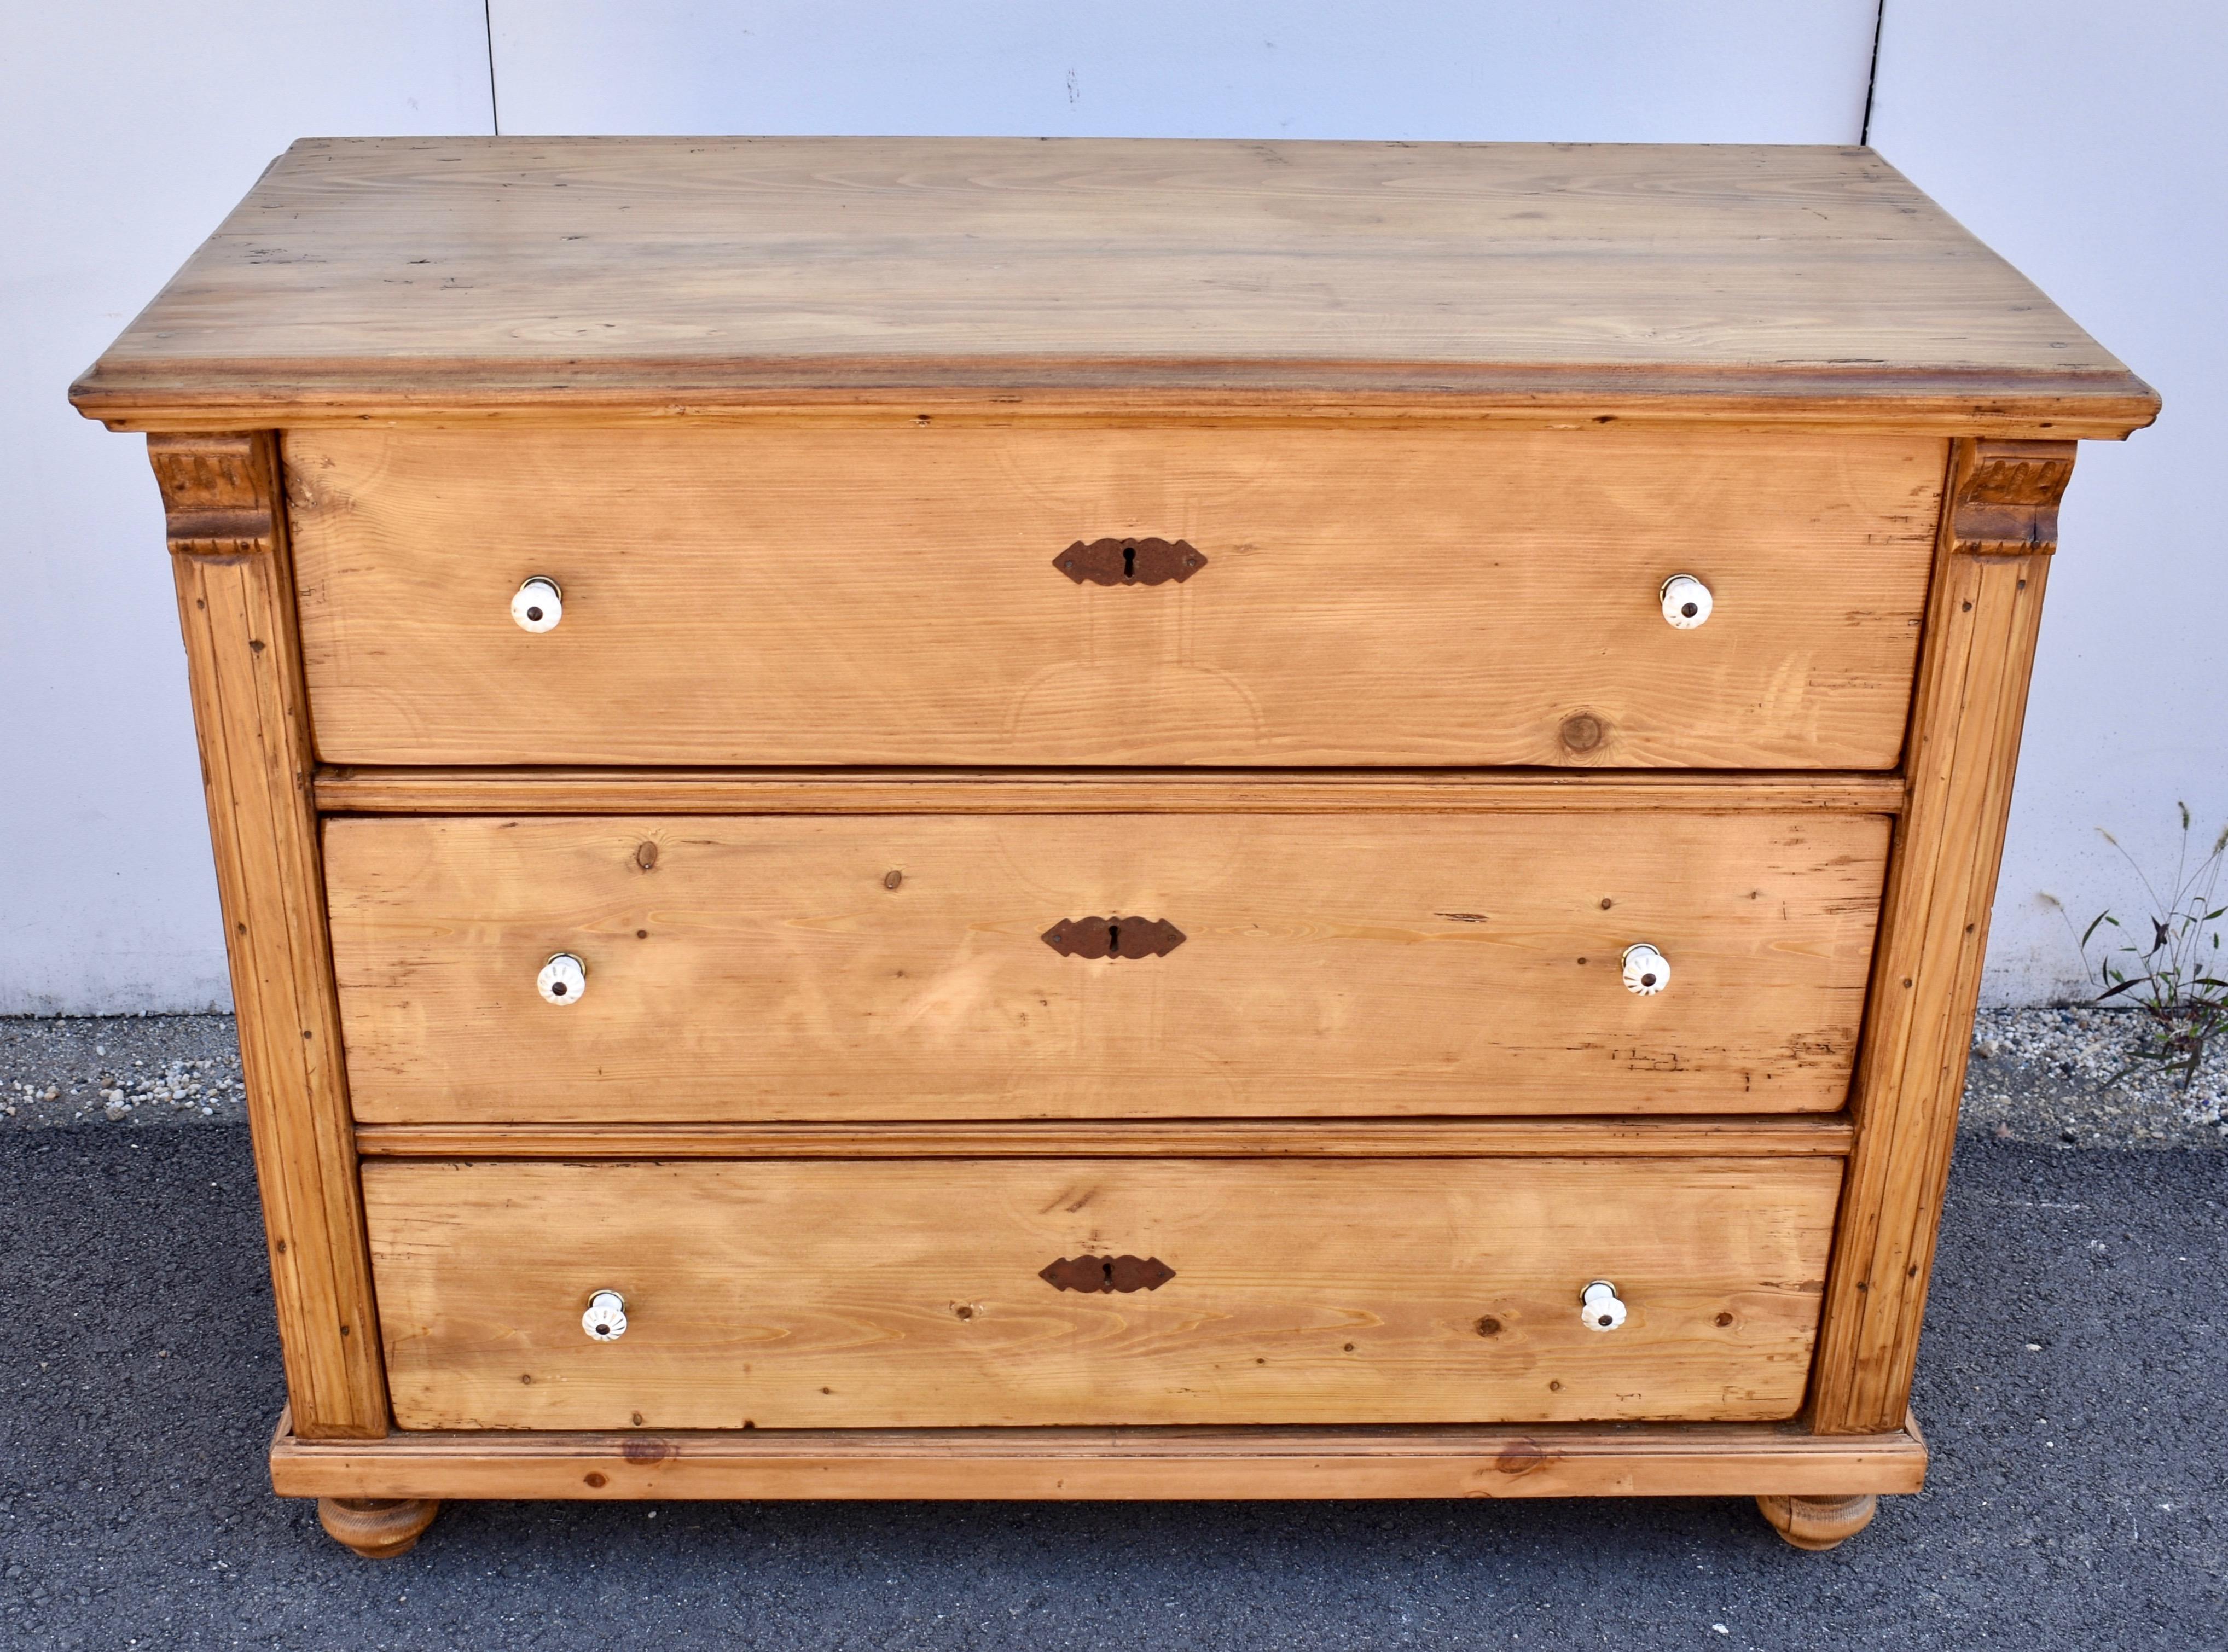 This is a lovely chest of three hand-cut dovetailed drawers, slightly graduating in reverse, with the top drawer being deepest.  The ceramic pulls are original to the piece.  The top has a step-down routed edge, which, with the ogee molding applied